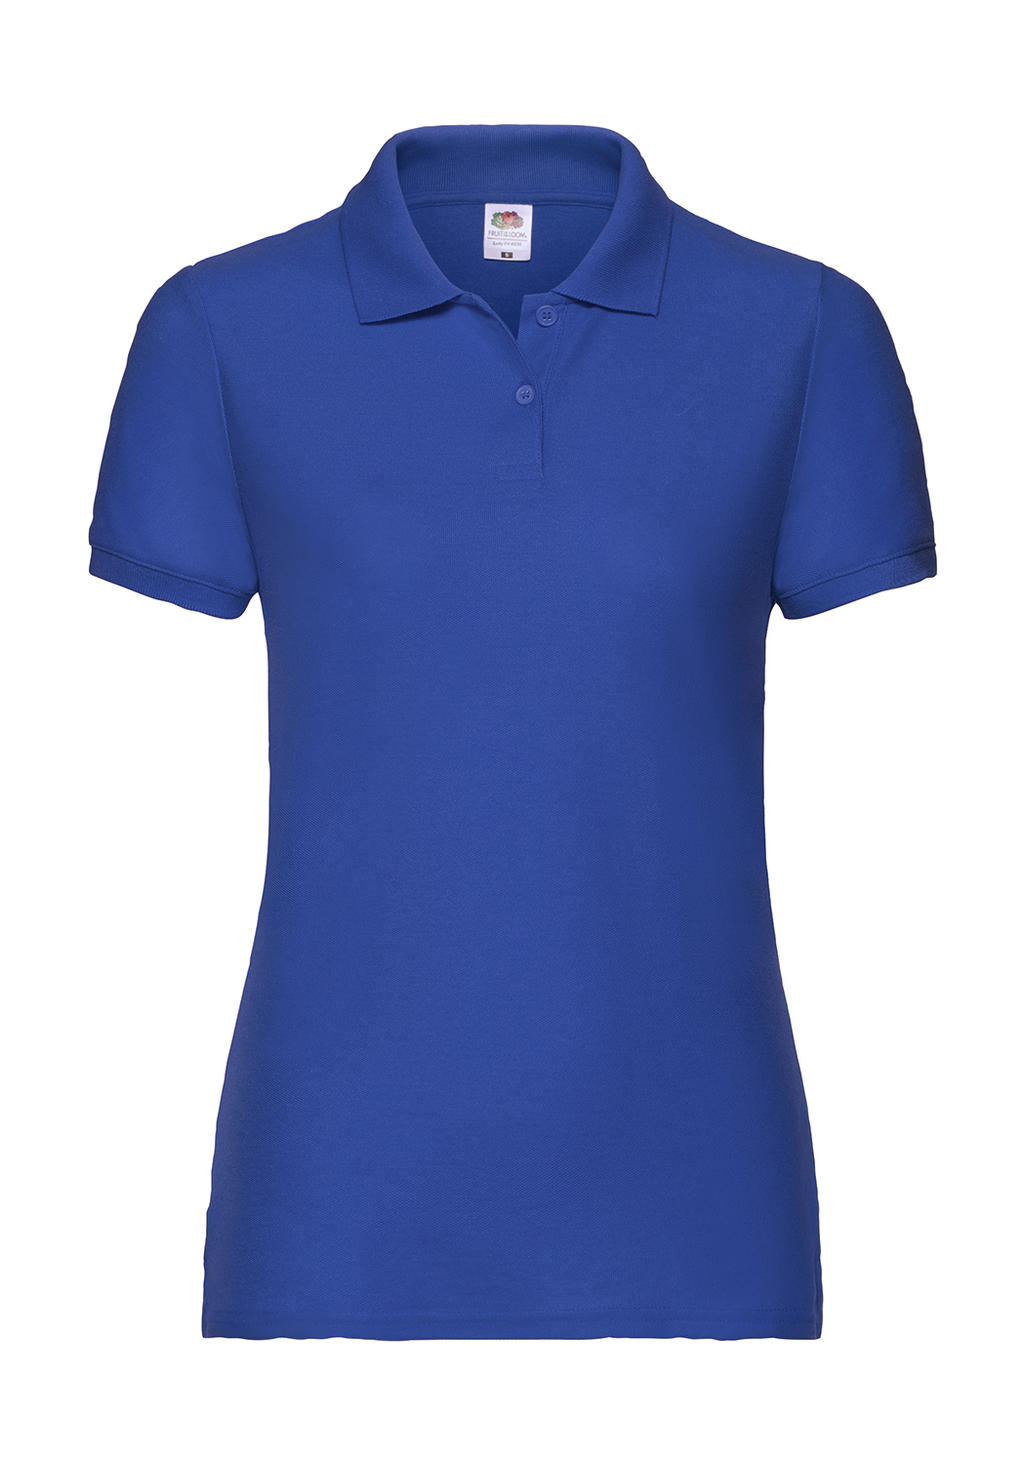  Ladies 65/35 Polo in Farbe Royal